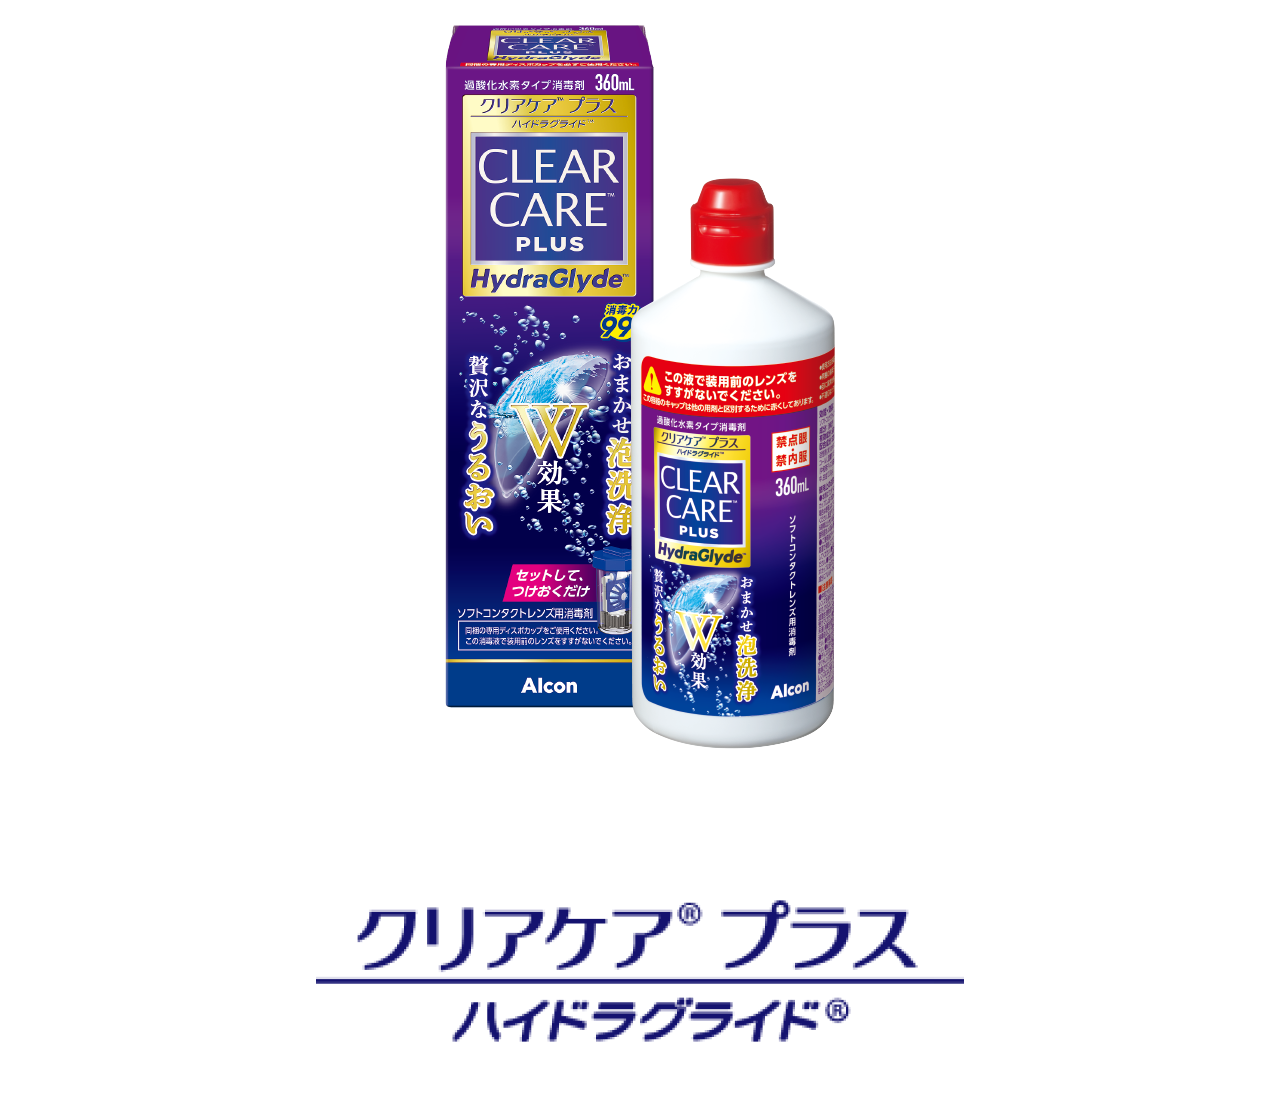 Clear Care plus hydraglyde pack shot